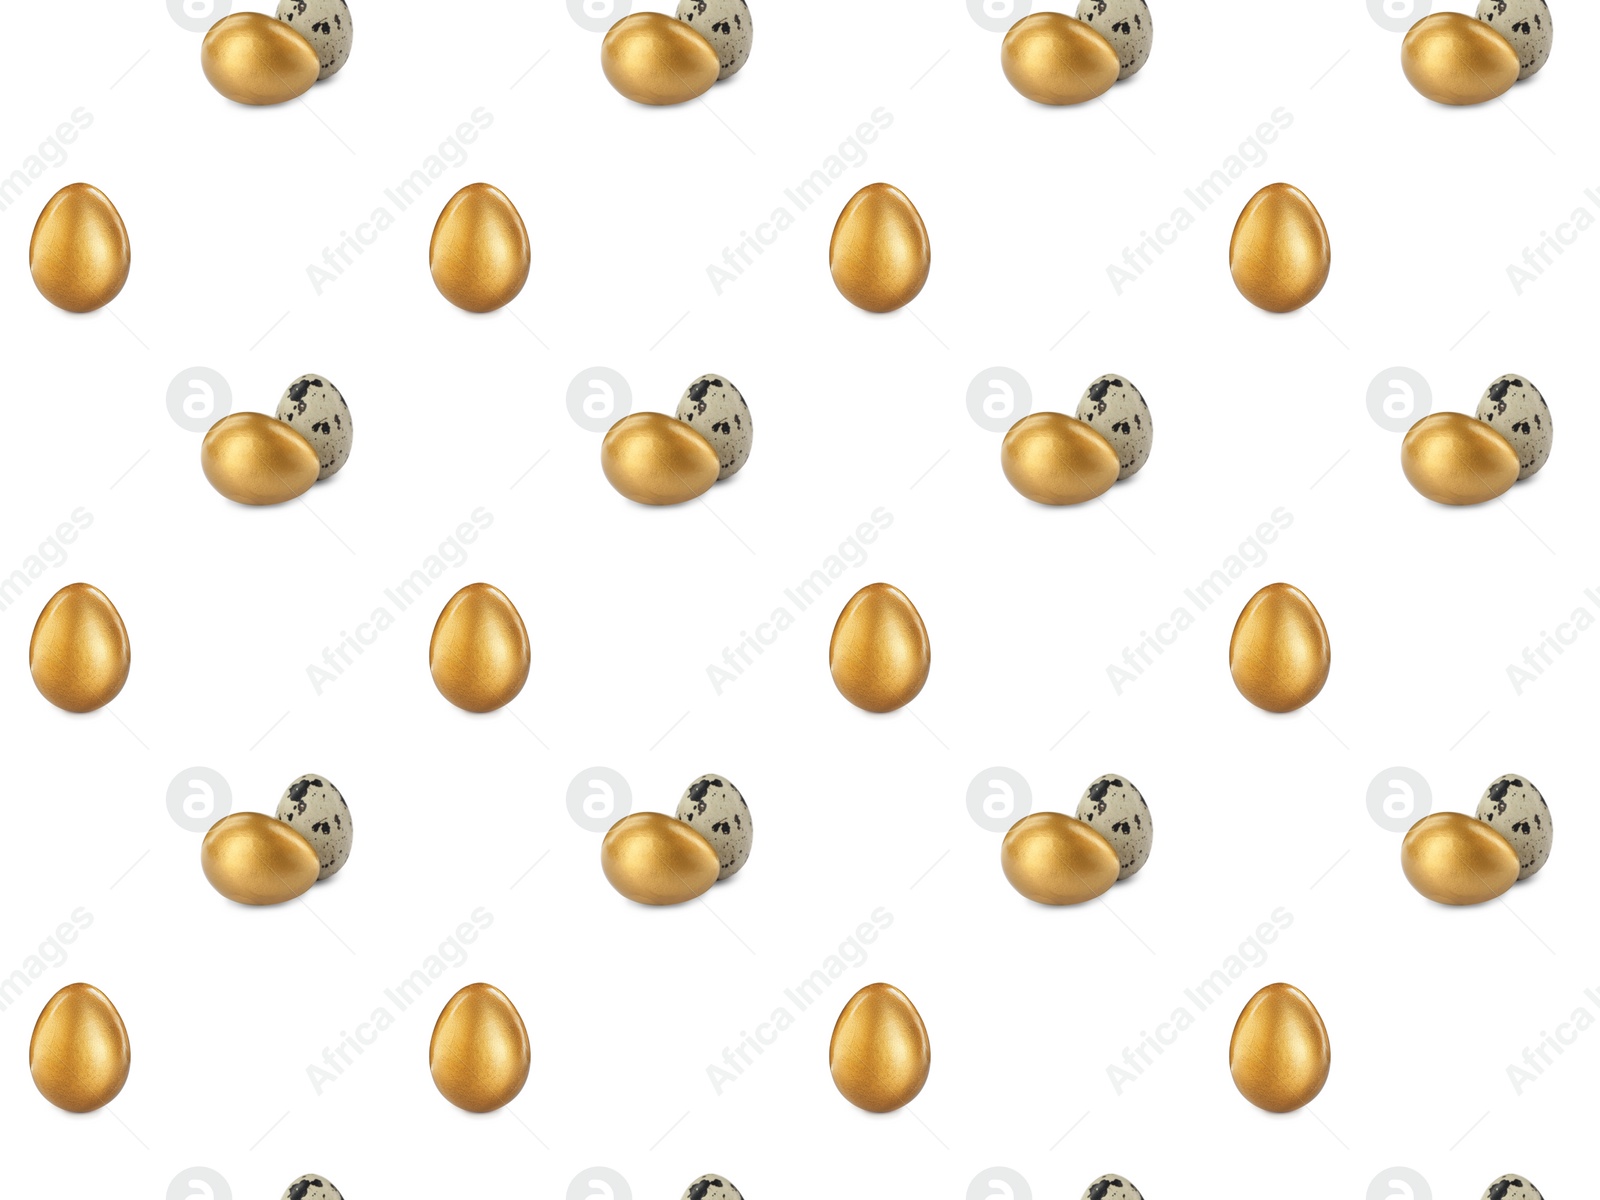 Image of Set with shiny golden eggs and quail ones on white background